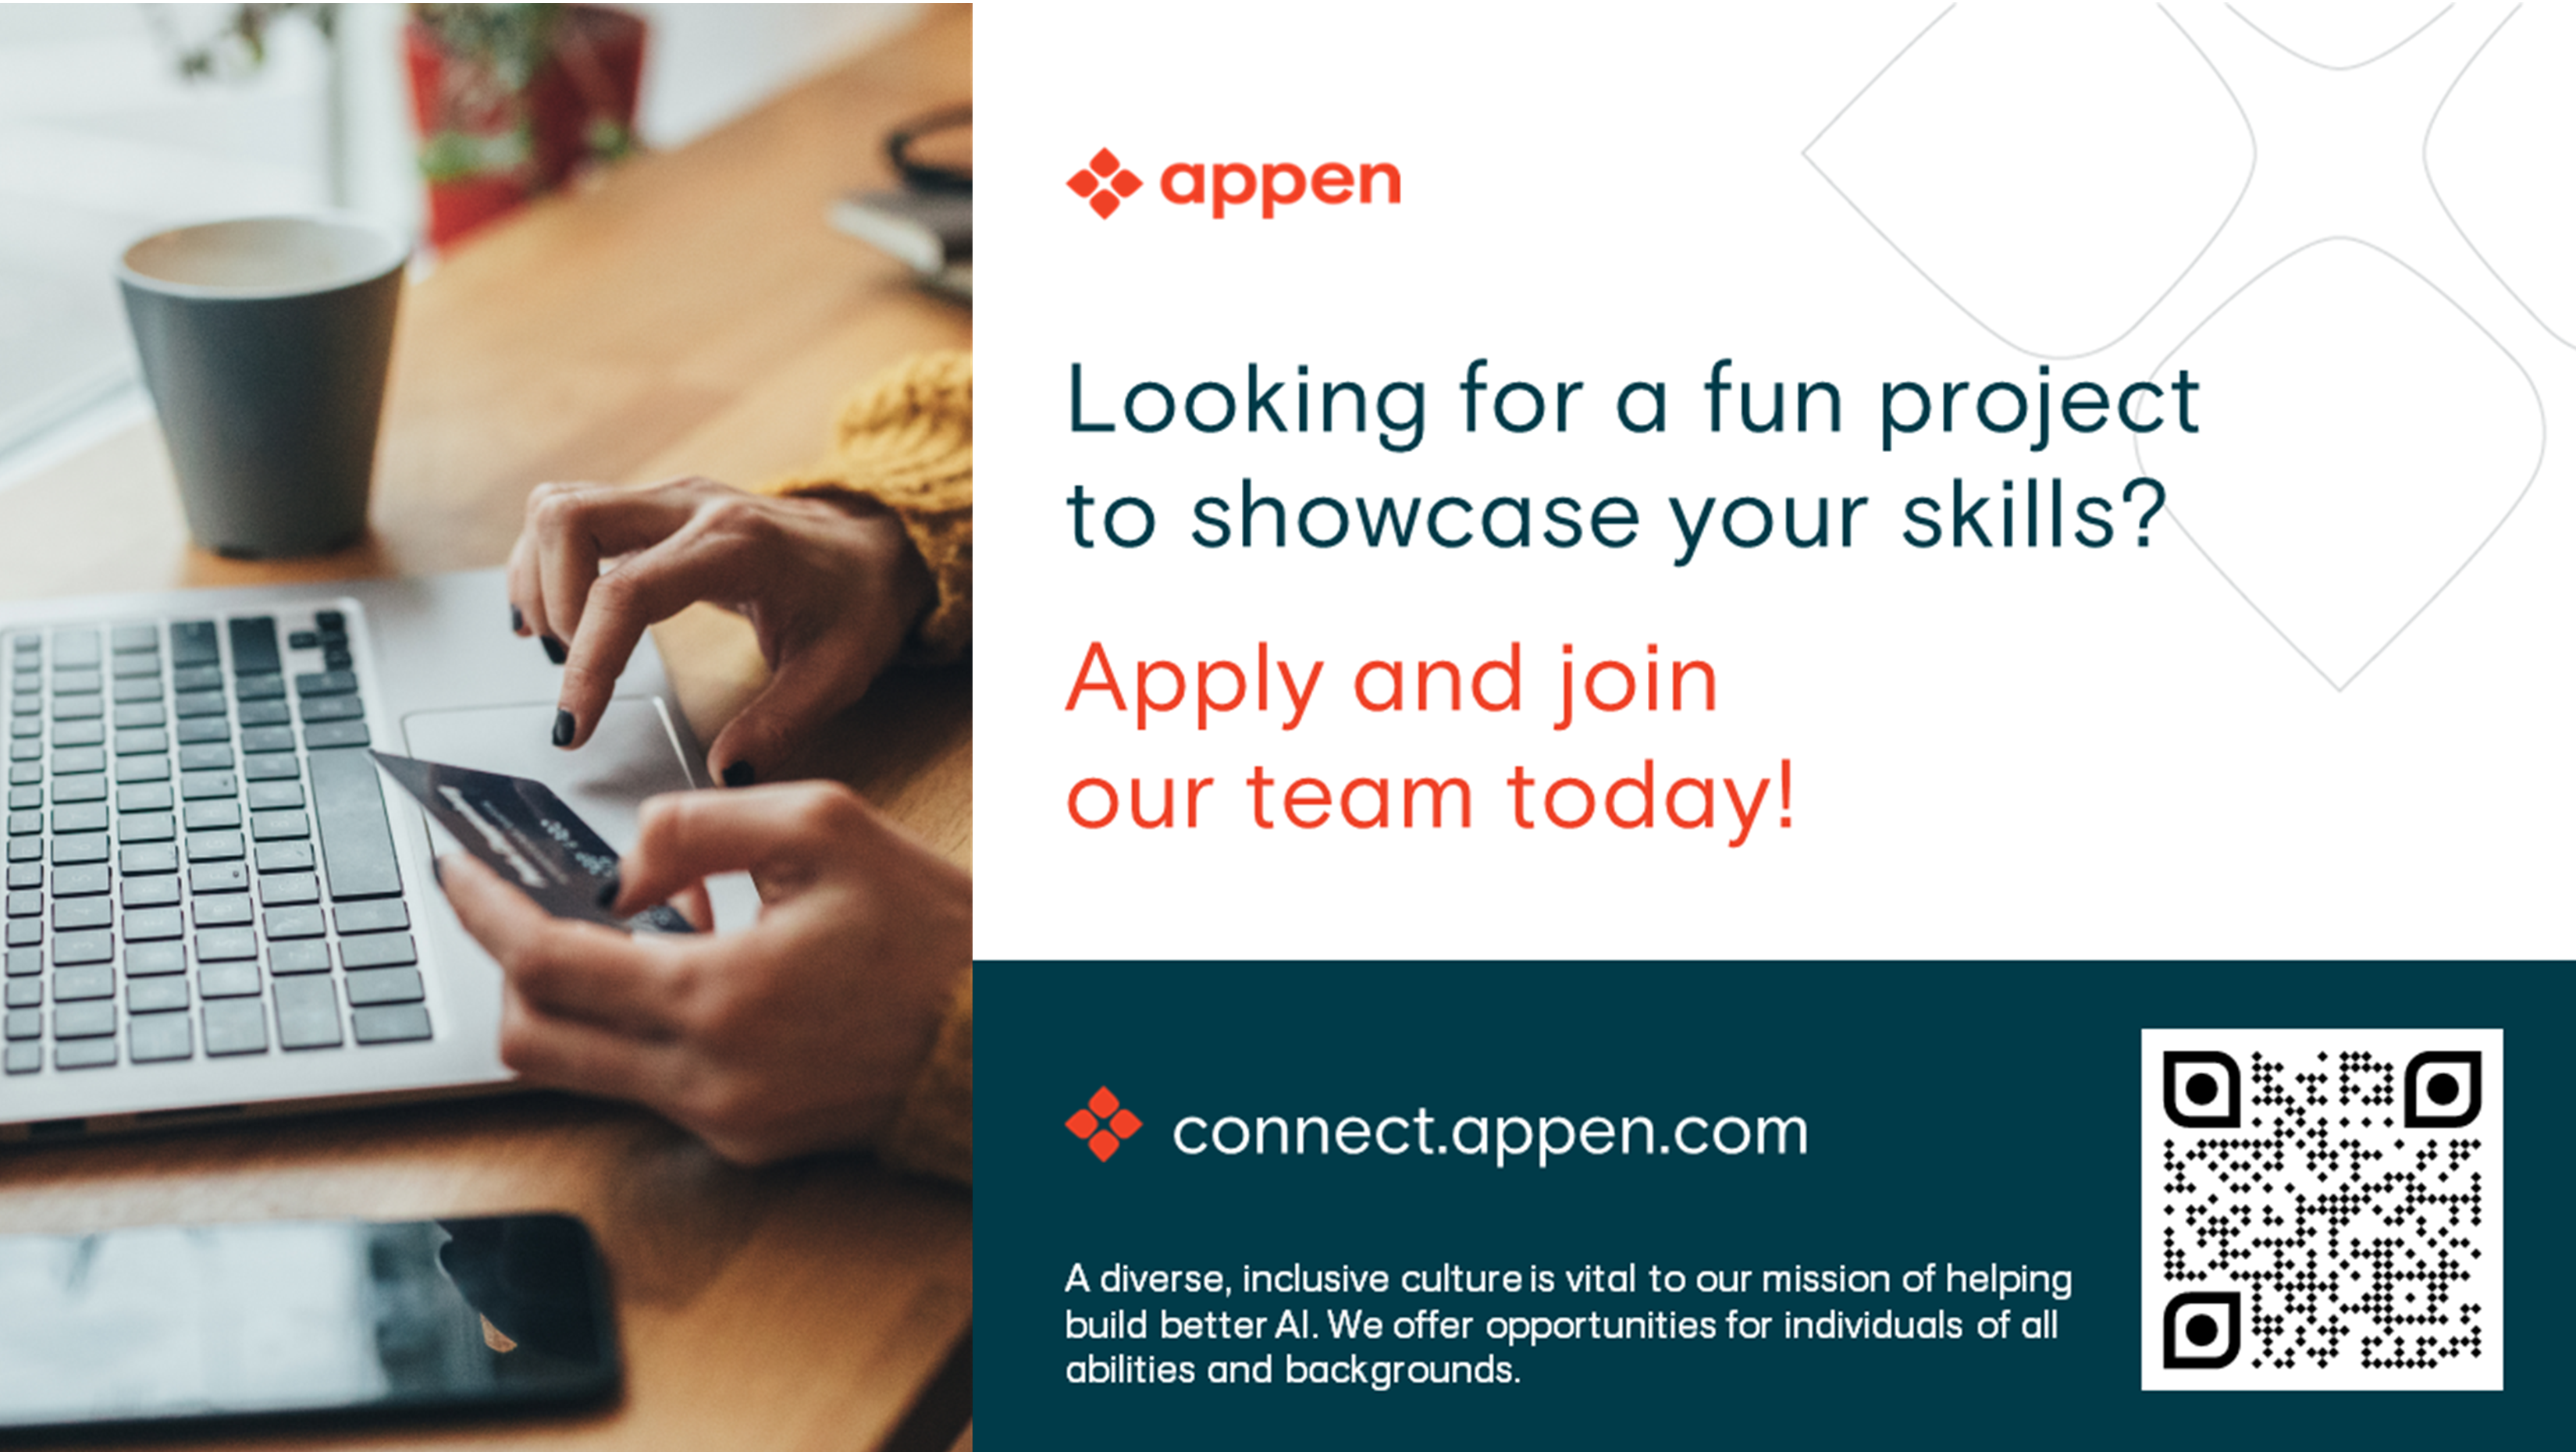 LCCCCCCCCooein ns

ol

[11s
||.

LULL

TU

LCL

(LLLLL

il
([LLLLLEE
I,

LIL
[ [IL
&amp;
[iL

LL
L

 

 

 
  
    
   
   

 

&lt;* appen
Looking for a fun project
to showcase your skills?

Apply and join
our team today!

 
     

connect.appen.com

A diverse, inclusive culture is vital to our mission of helping

build better Al. We offer opportunities for individuals of all
abilities and backgrounds.